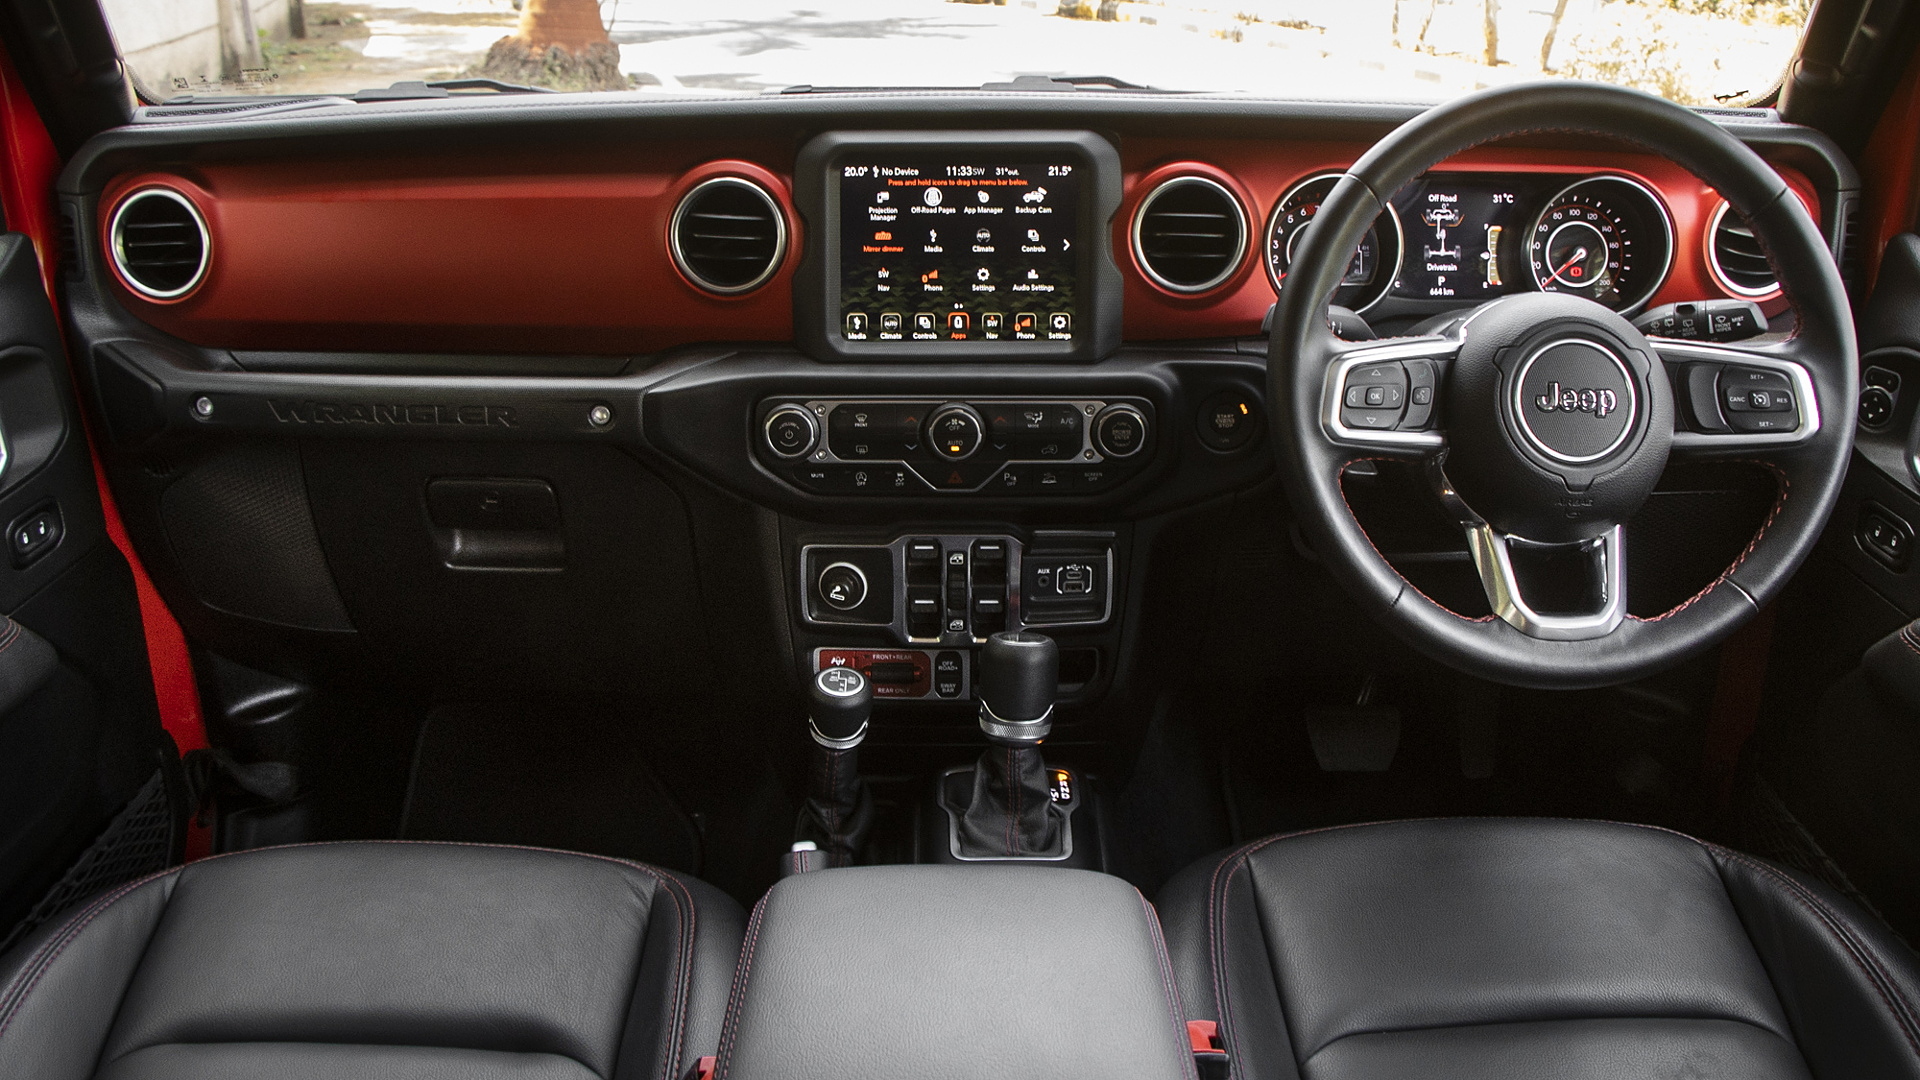 Jeep Wrangler Images - Interior & Exterior Photo Gallery [150+ Images] -  CarWale